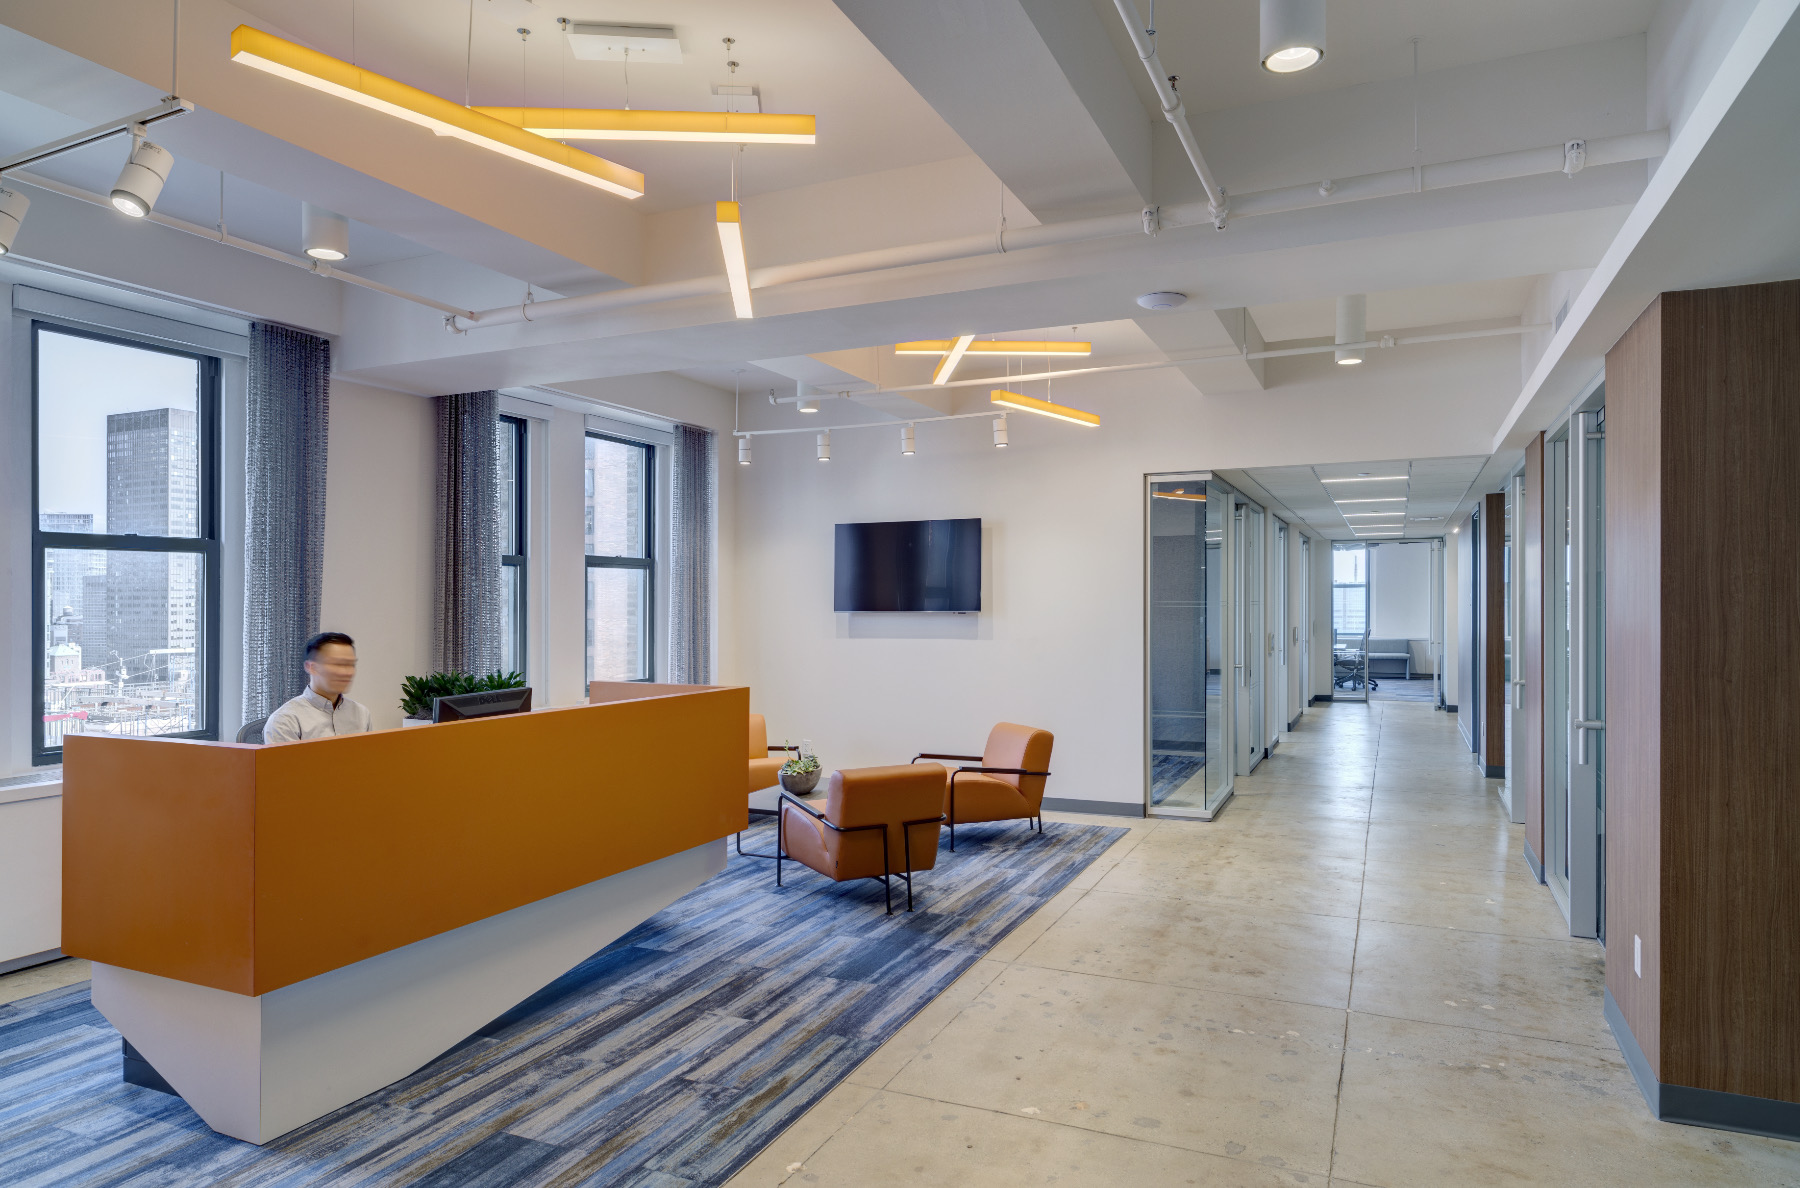 A Look Inside CreditSights’ New NYC Office